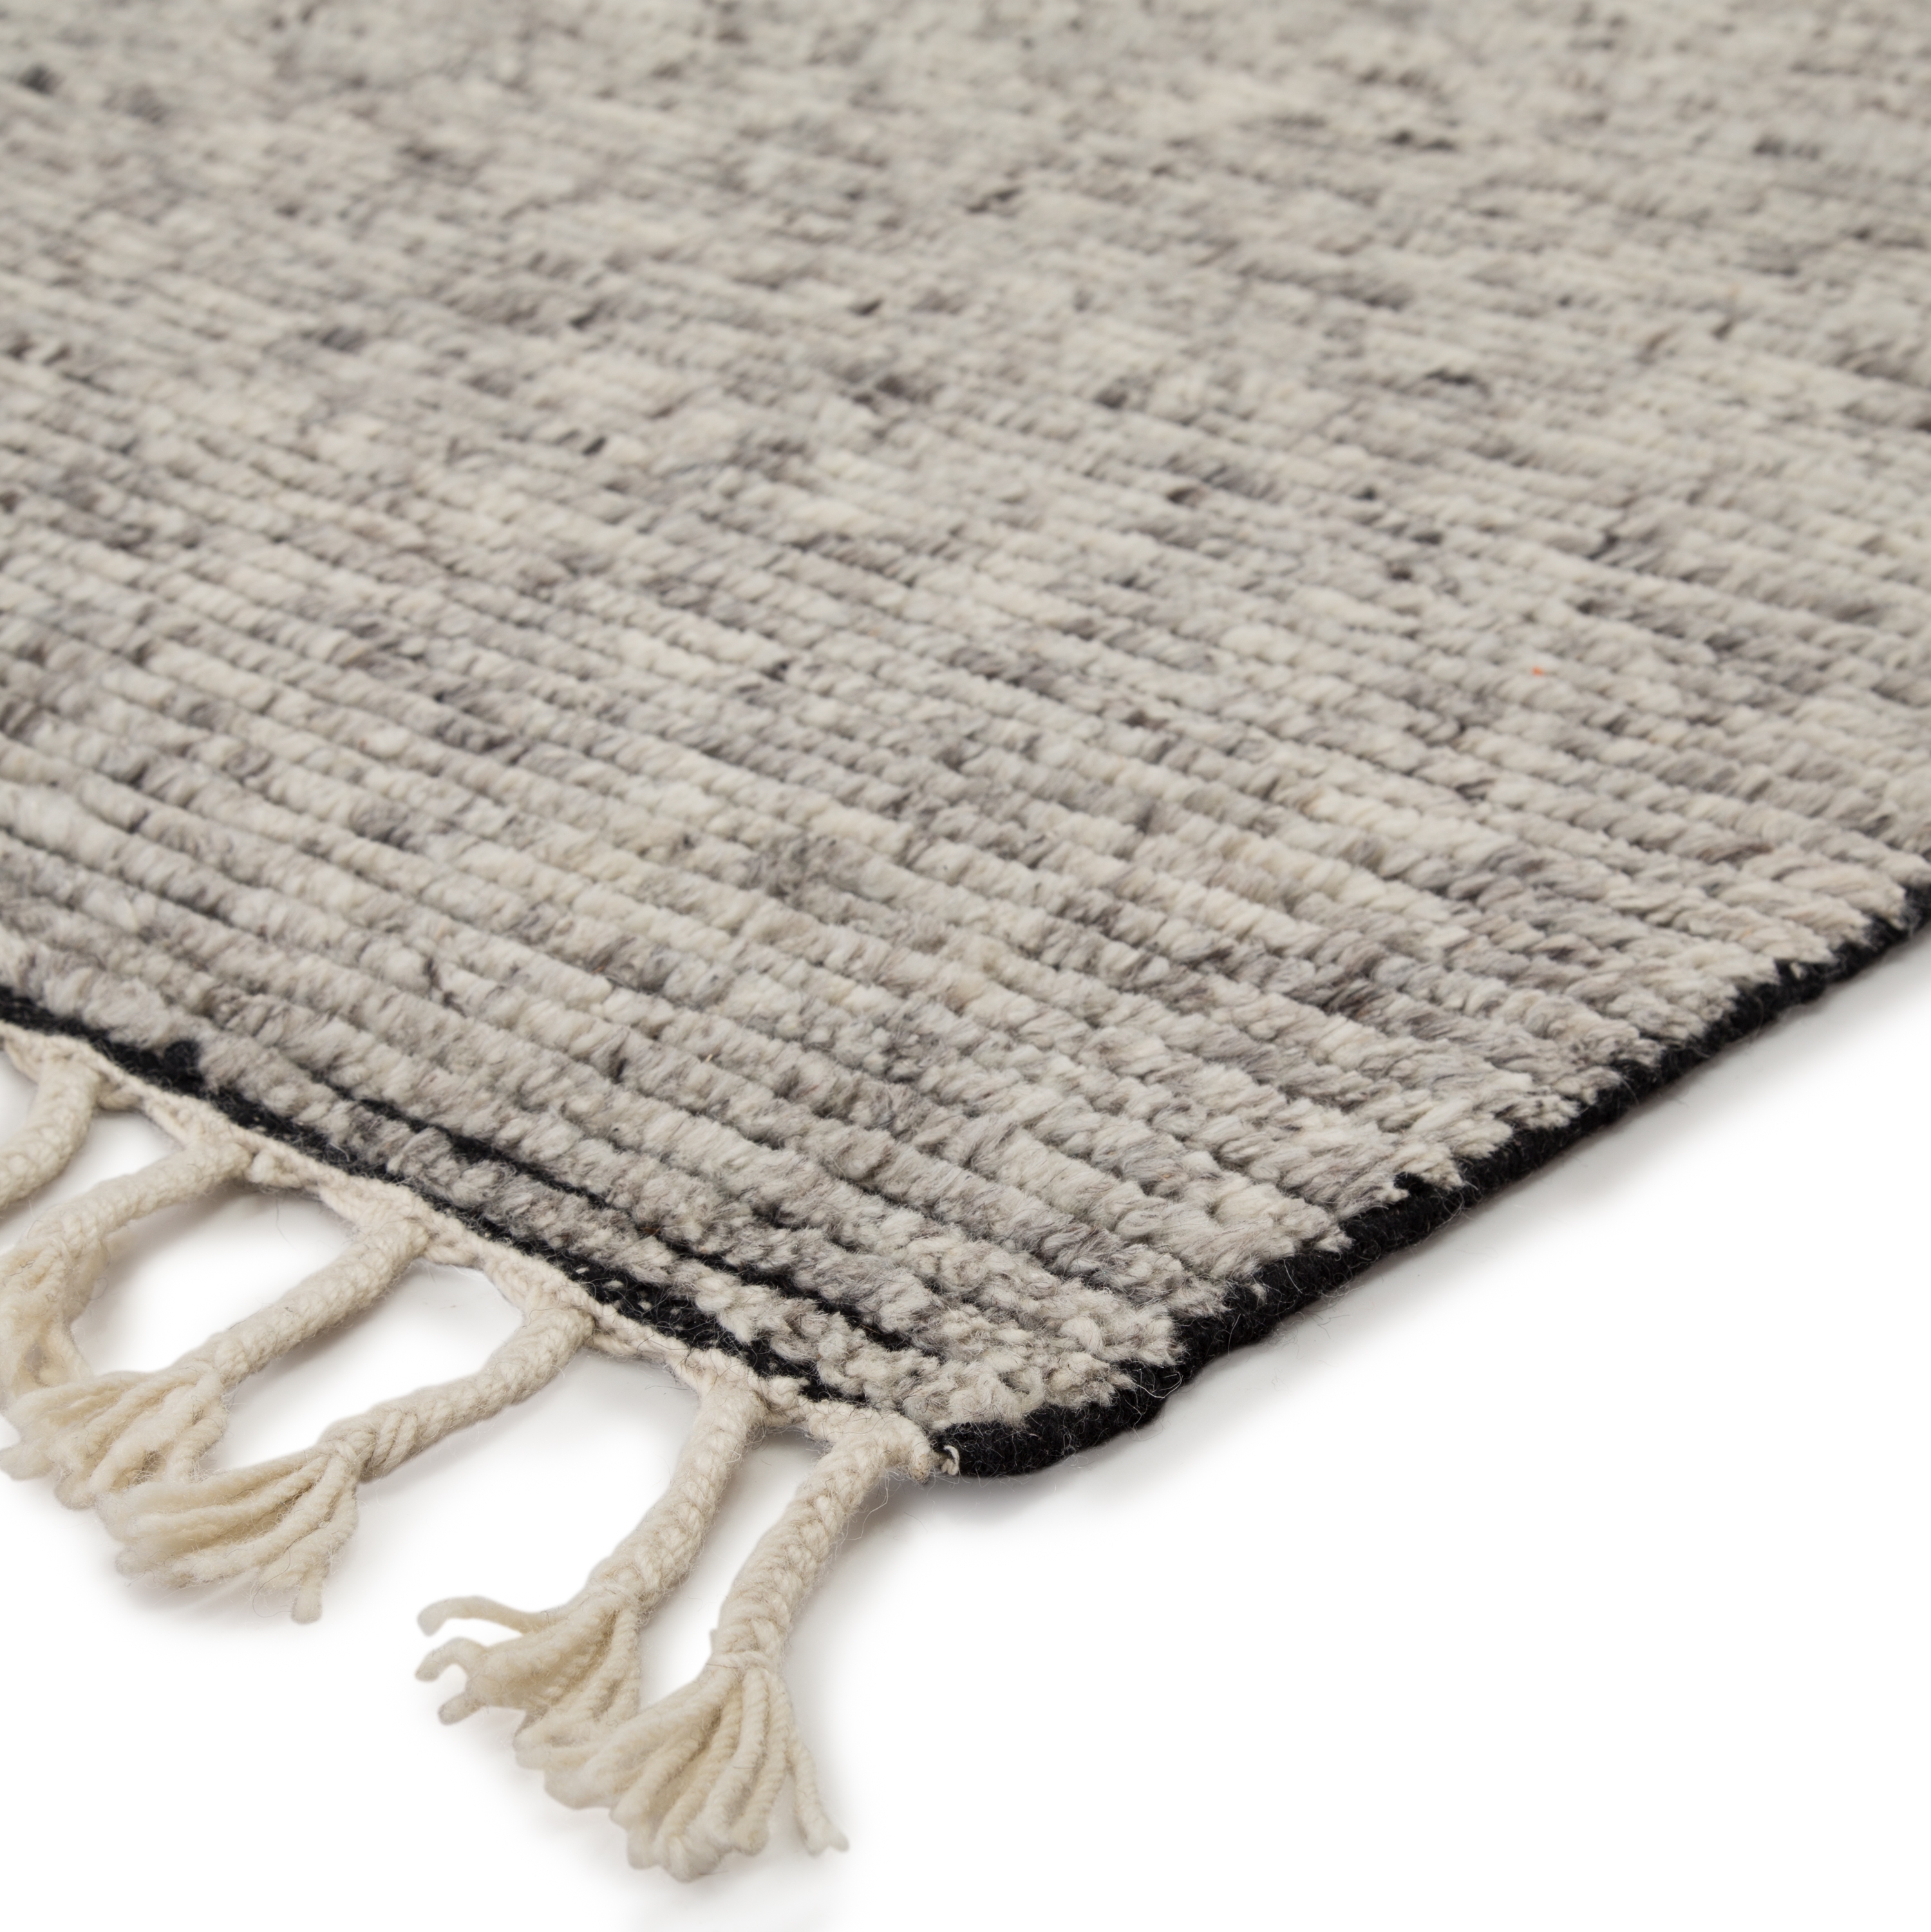 Alpine Hand-Knotted Stripe White/ Gray Area Rug (5' X 8') - Image 1